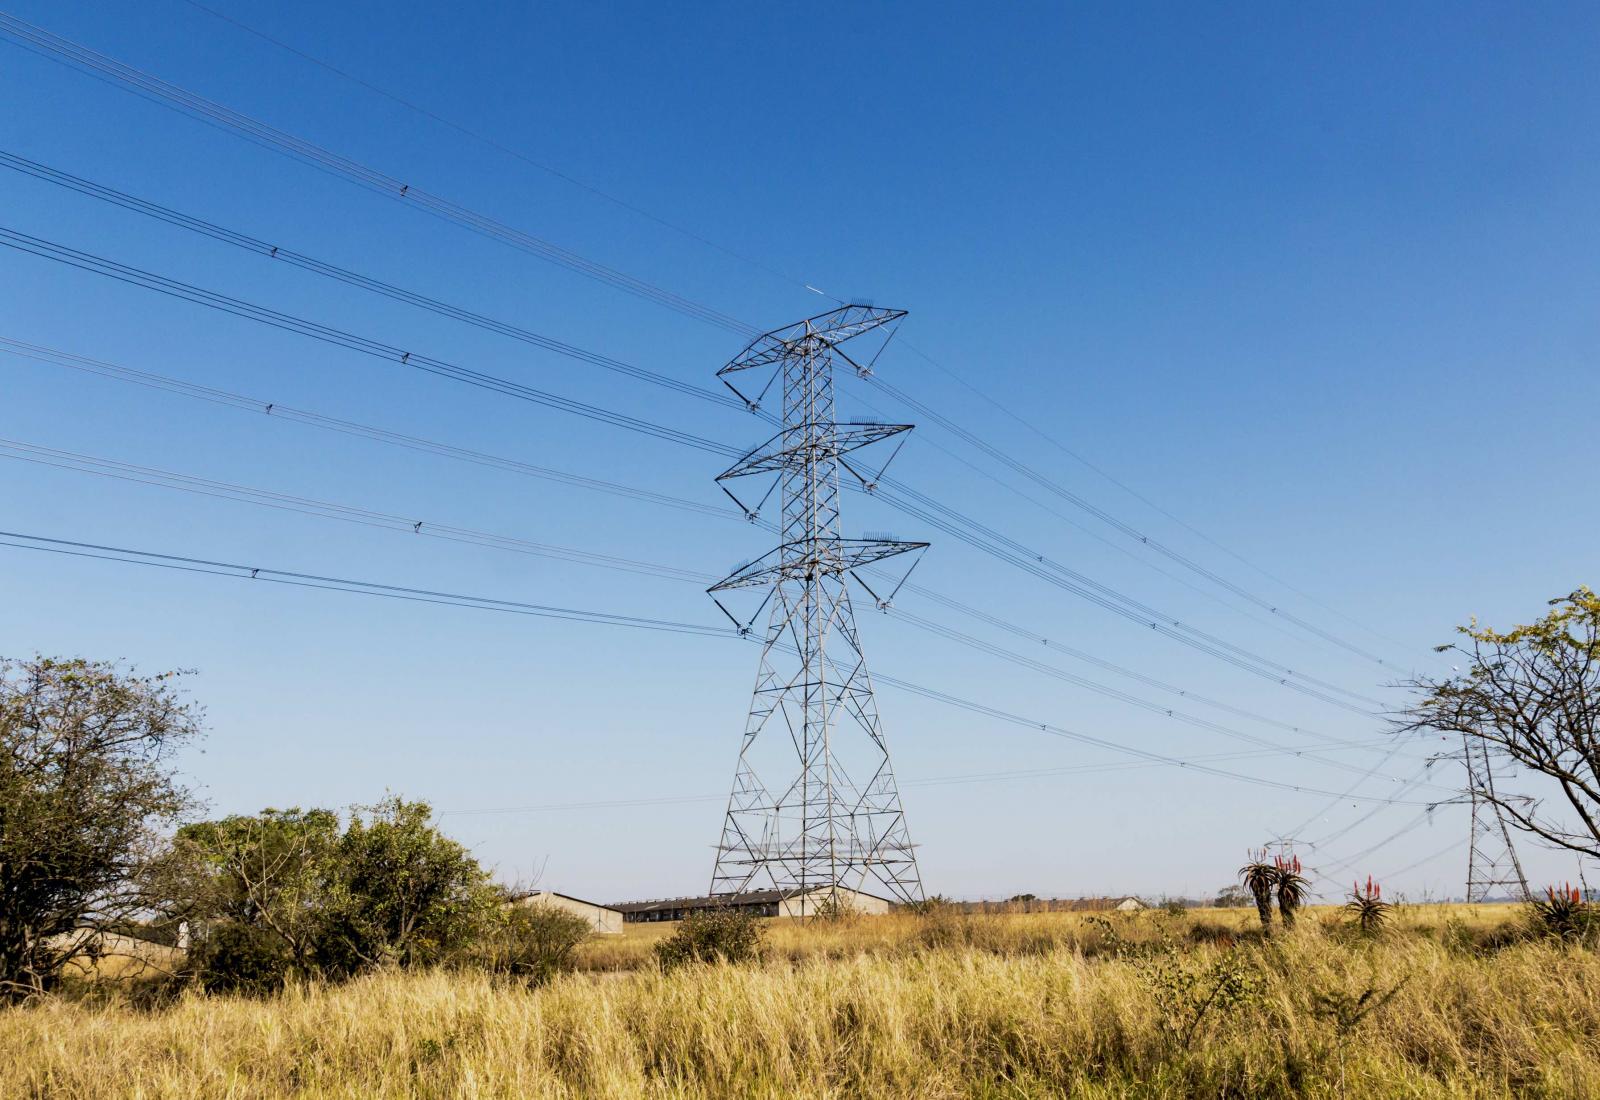 South Africa Power Grid